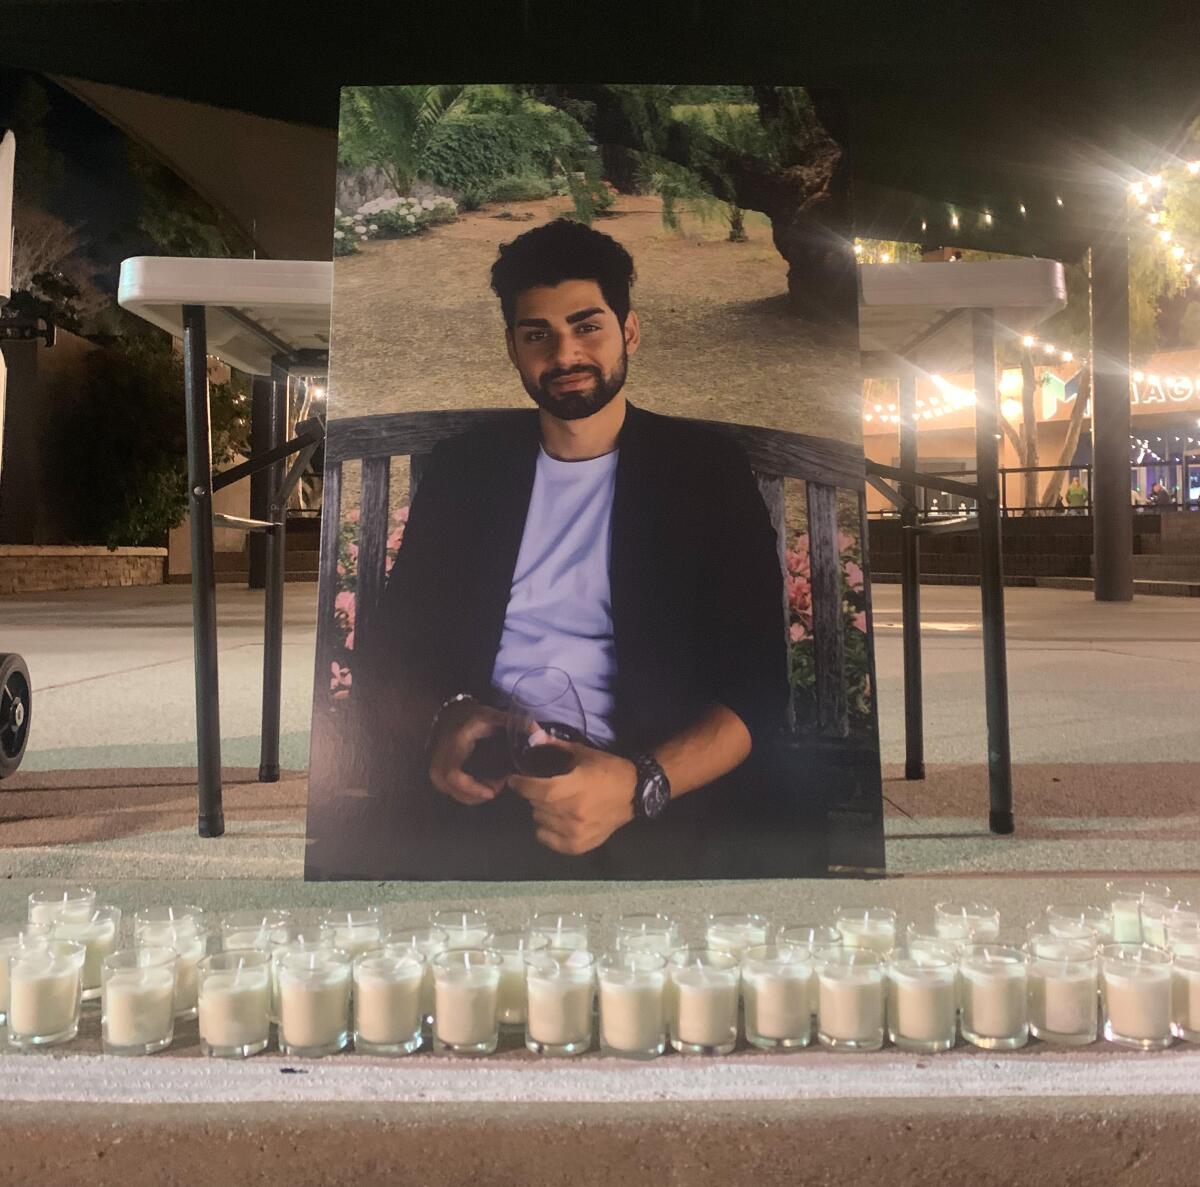 Pportrait of Benjamin Harouni displayed at a candlelight vigil in front of El Cajon City Hall March 3.